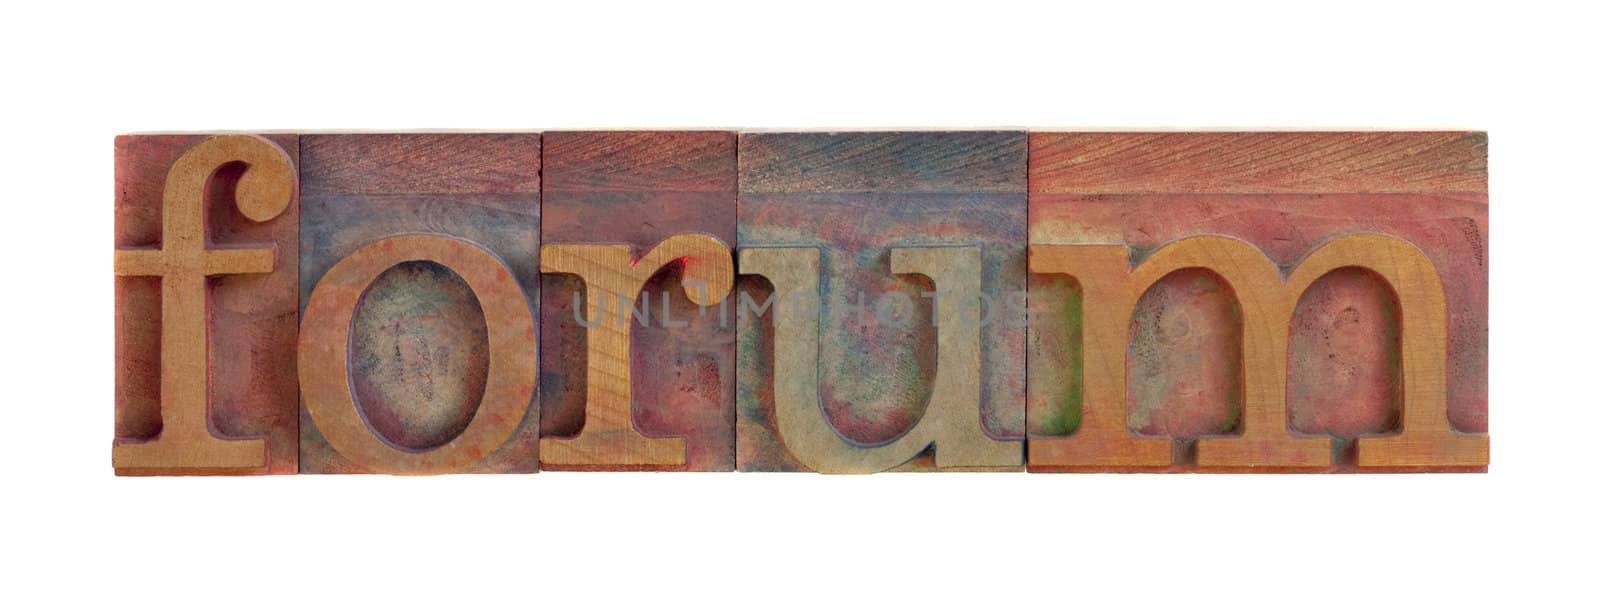 the forum word  in vintage wooden letterpress type blocks, stained by color ink, isolated on white